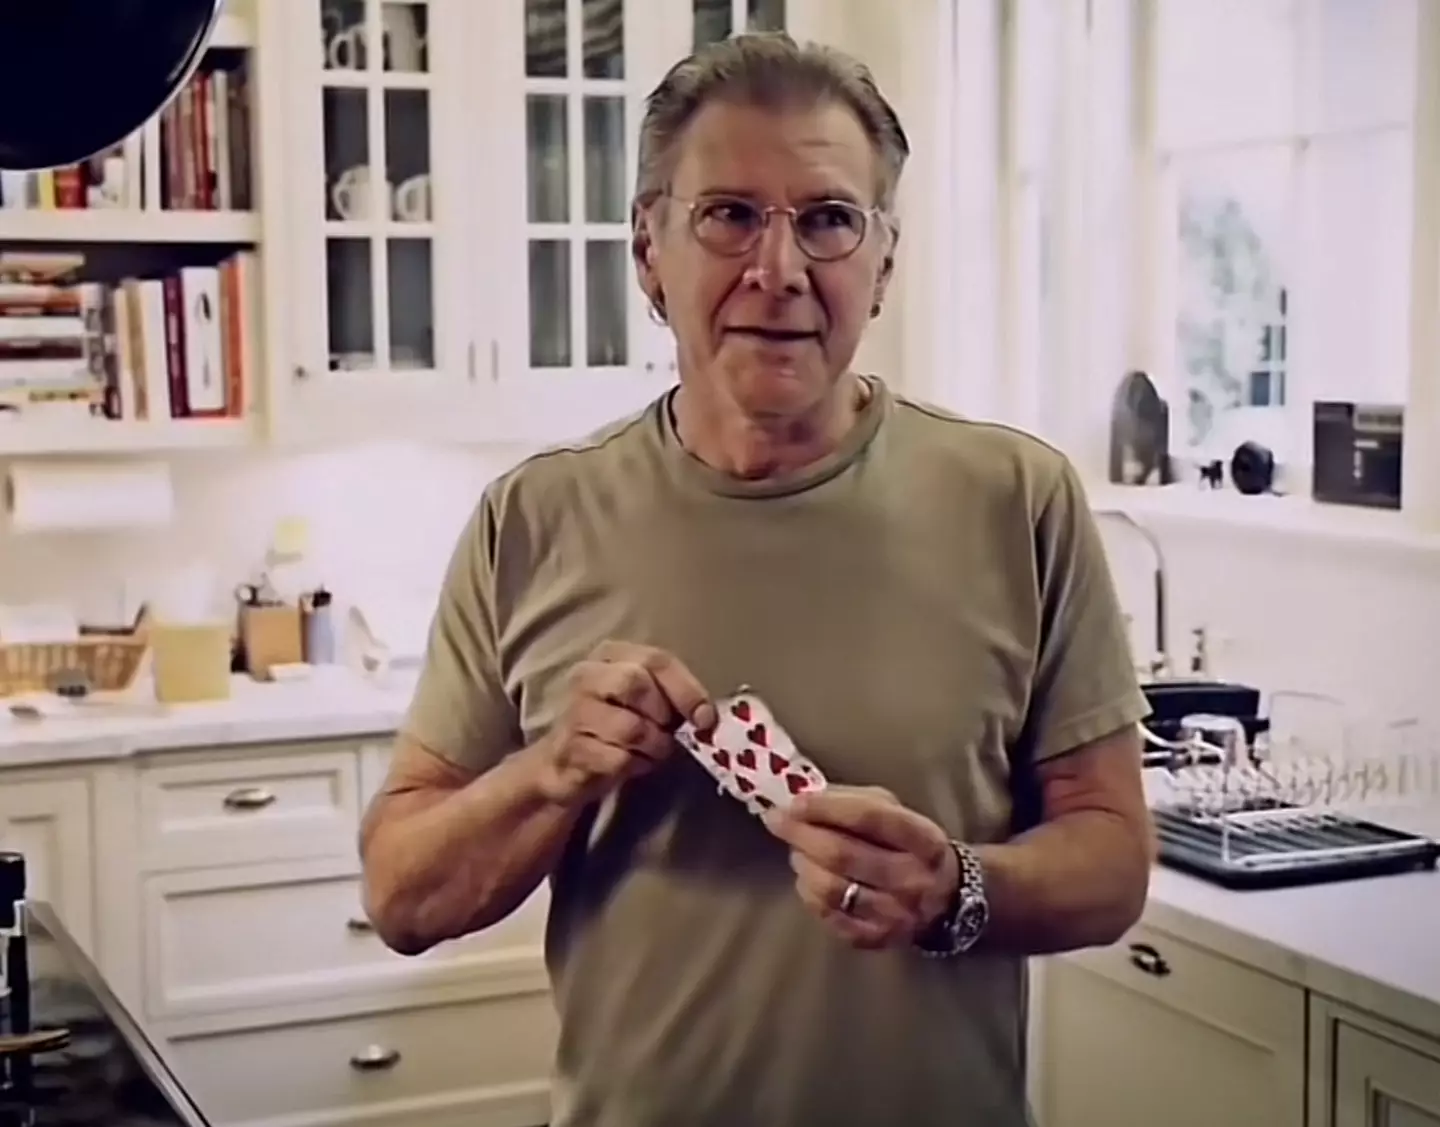 Harrison Ford's reaction to the trick was absolutely priceless.